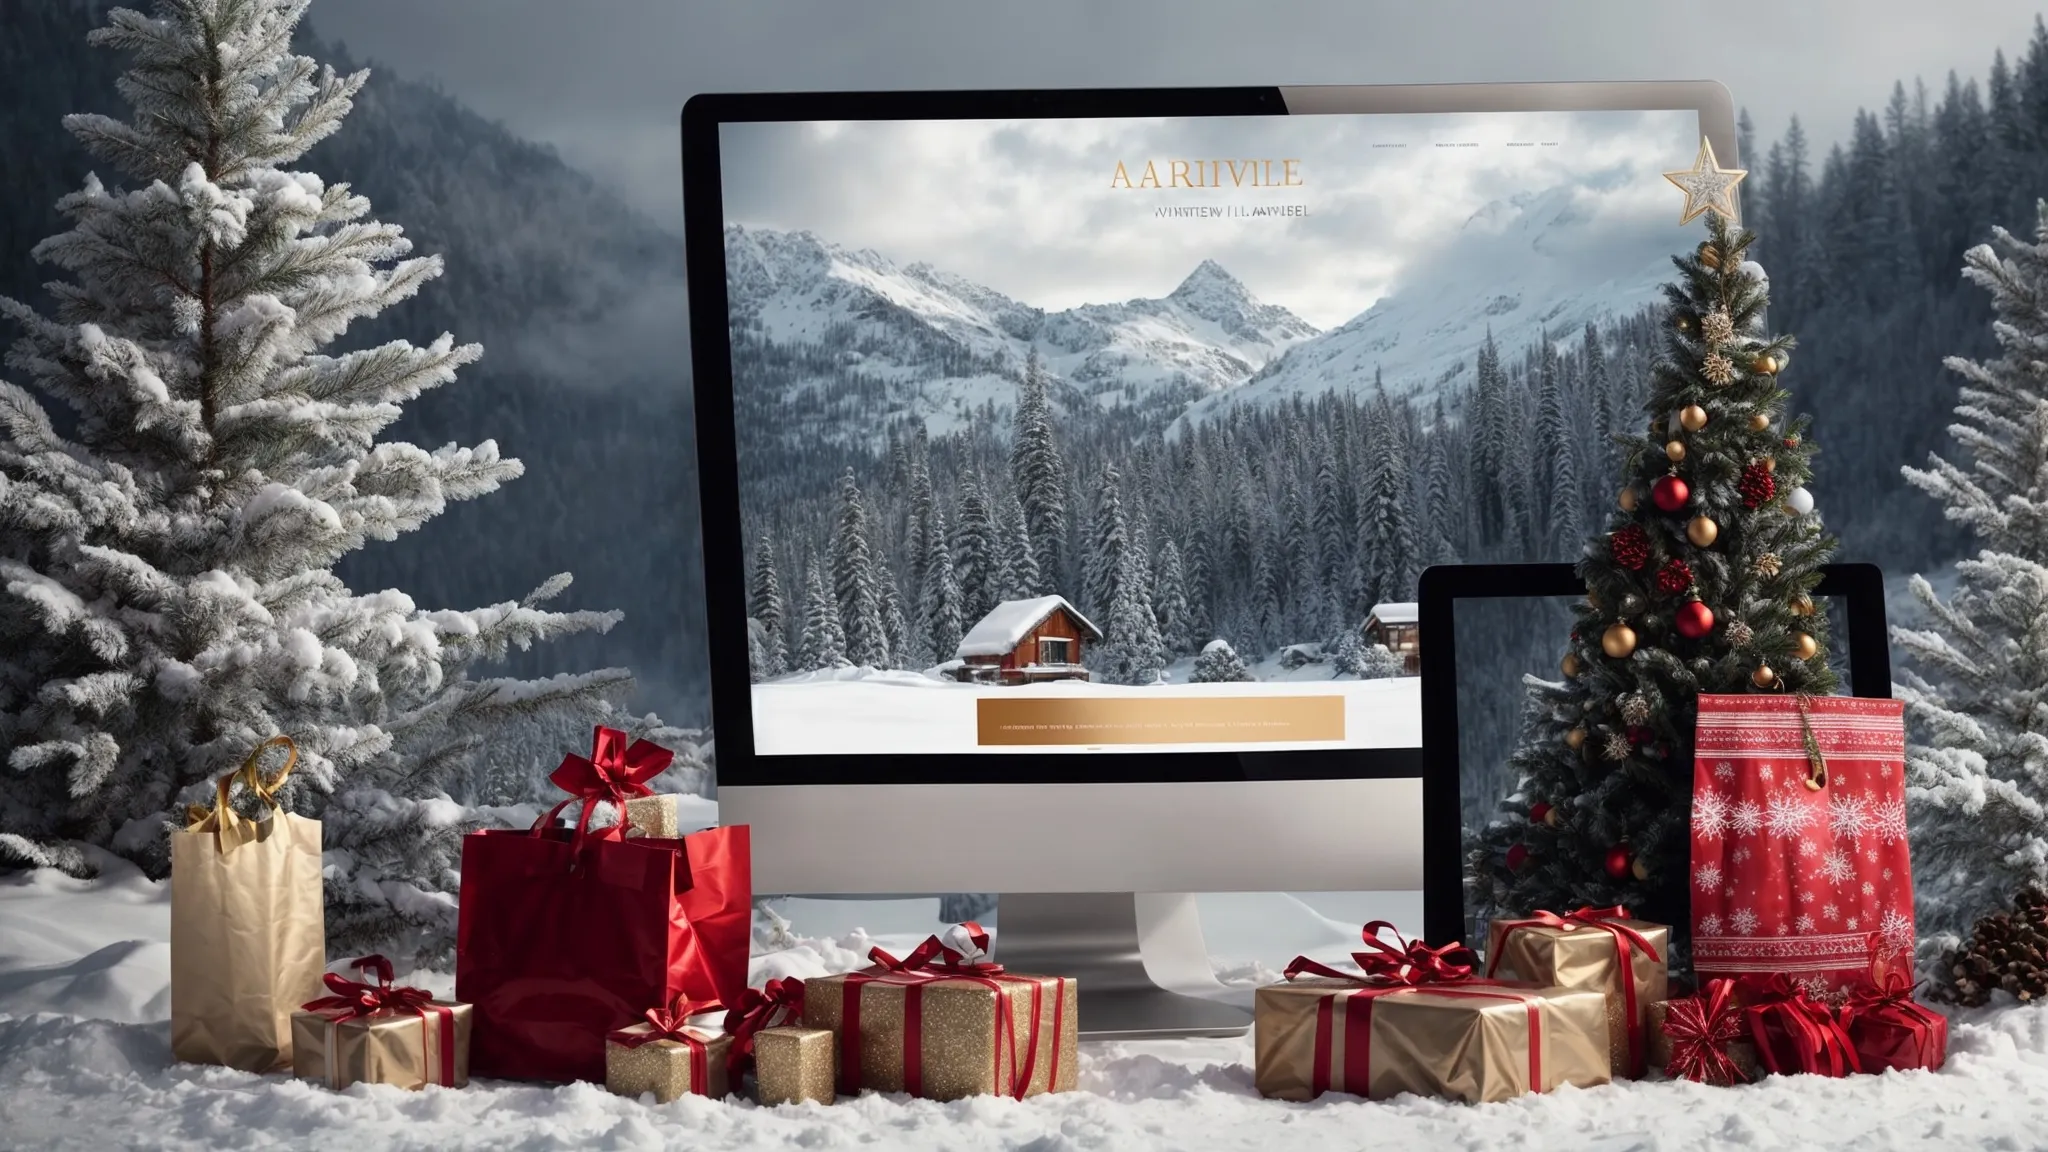 a winter holiday-themed shopping website interface displaying festive products and a search bar on a computer screen.